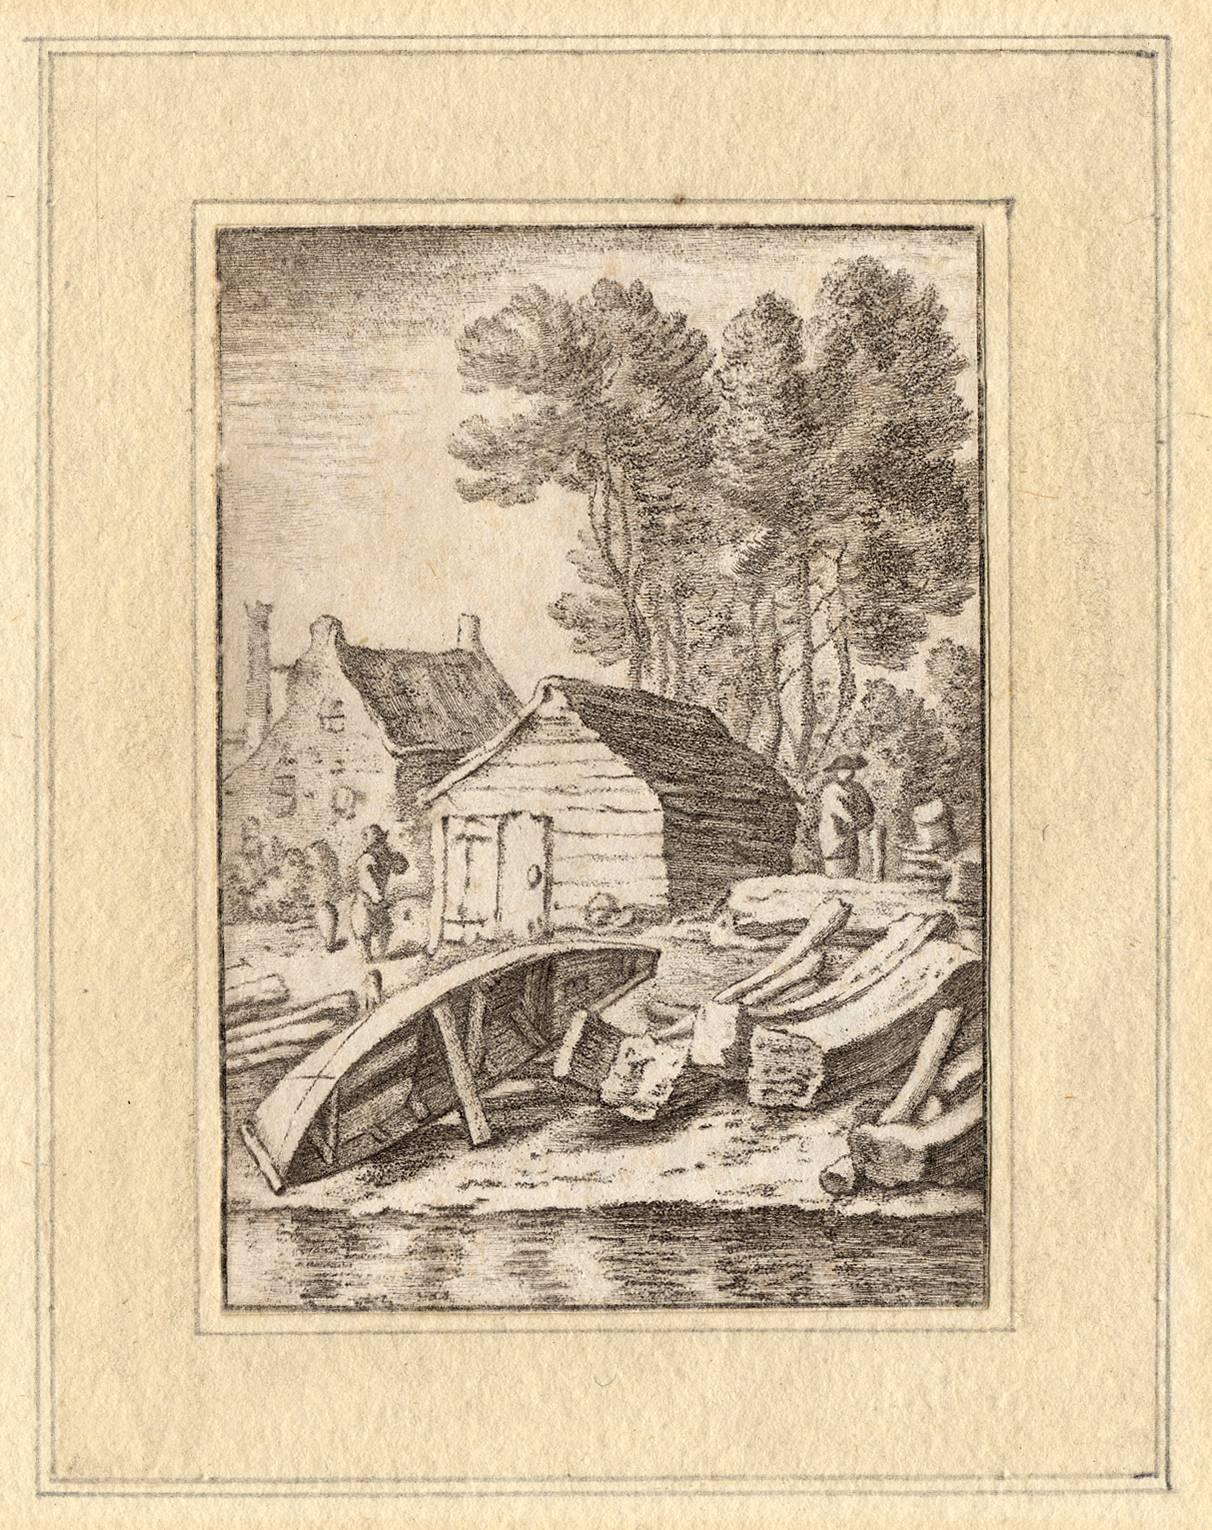 Cornelis Ploos van Amstel Landscape Print - Set of 2 prints: A ship's wharf & A bend in the river with a ship.